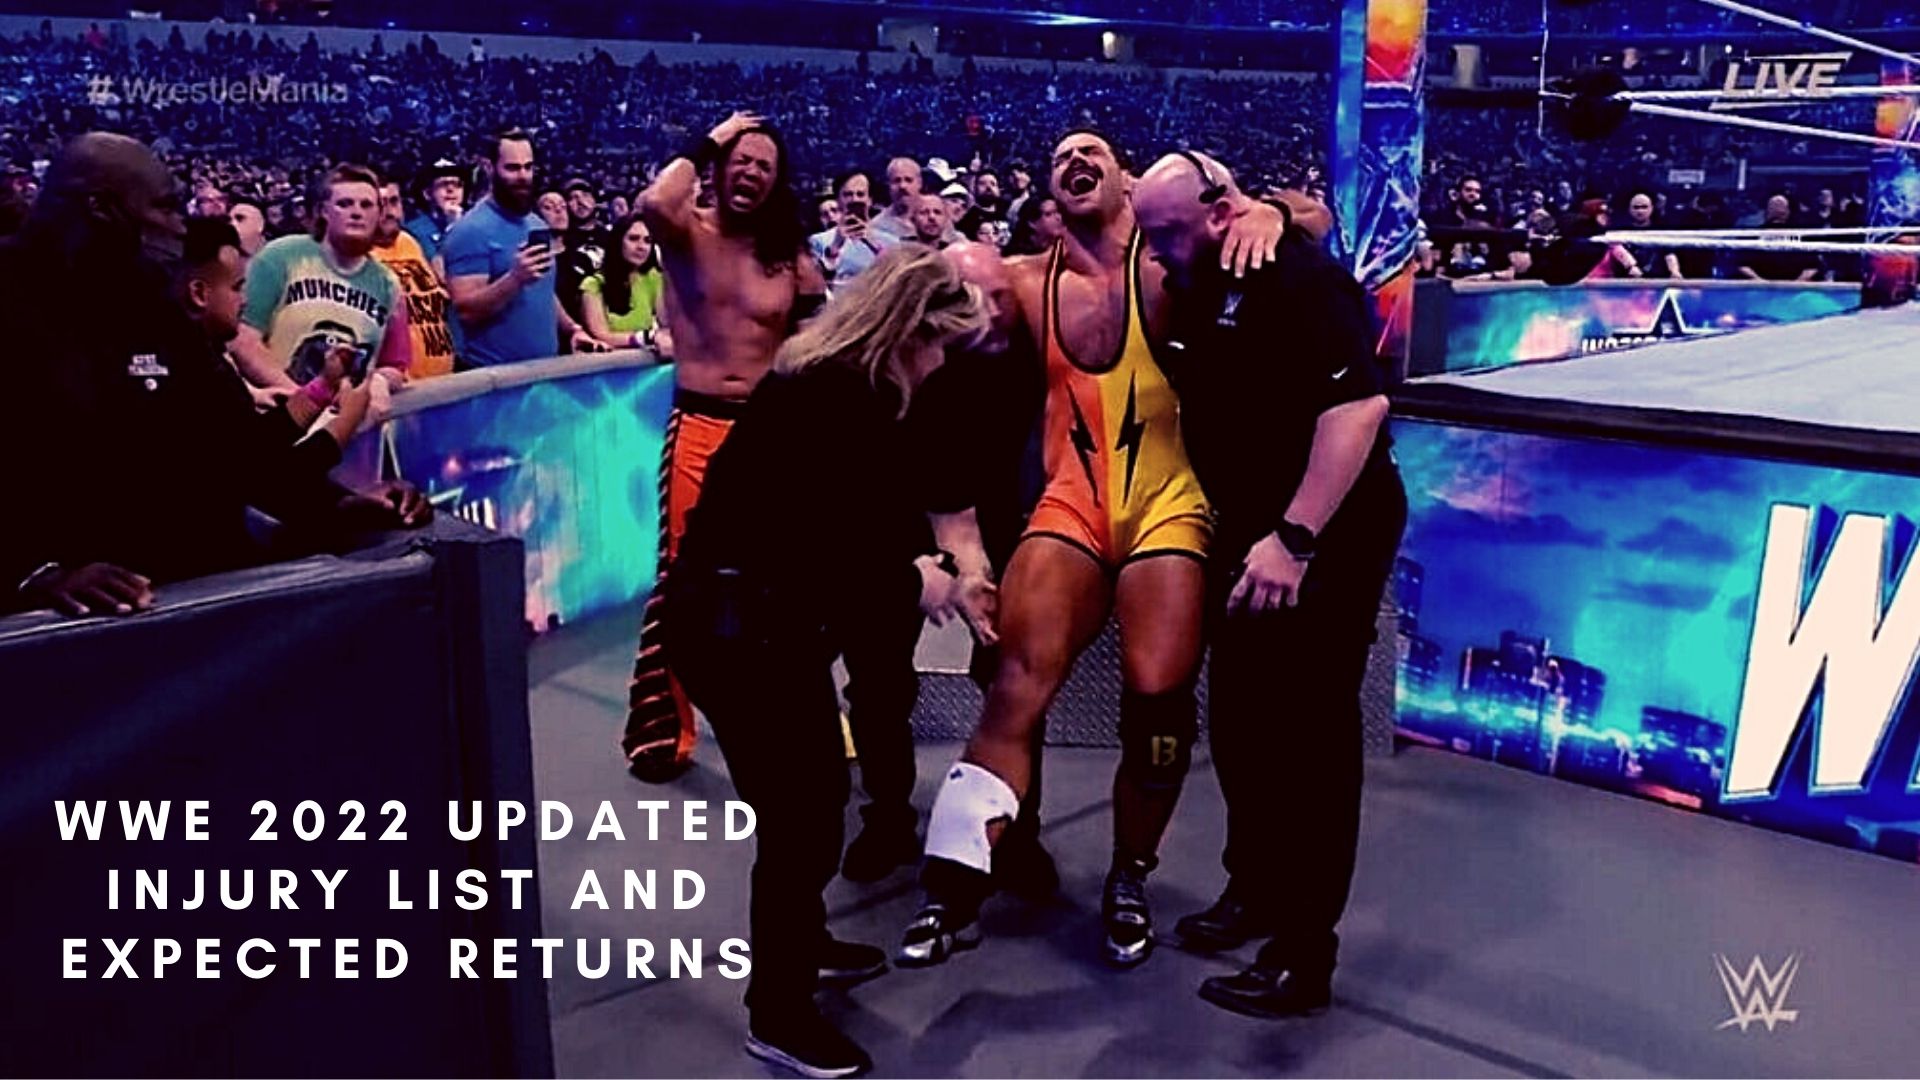 WWE 2022 Updated Injury list and expected returns